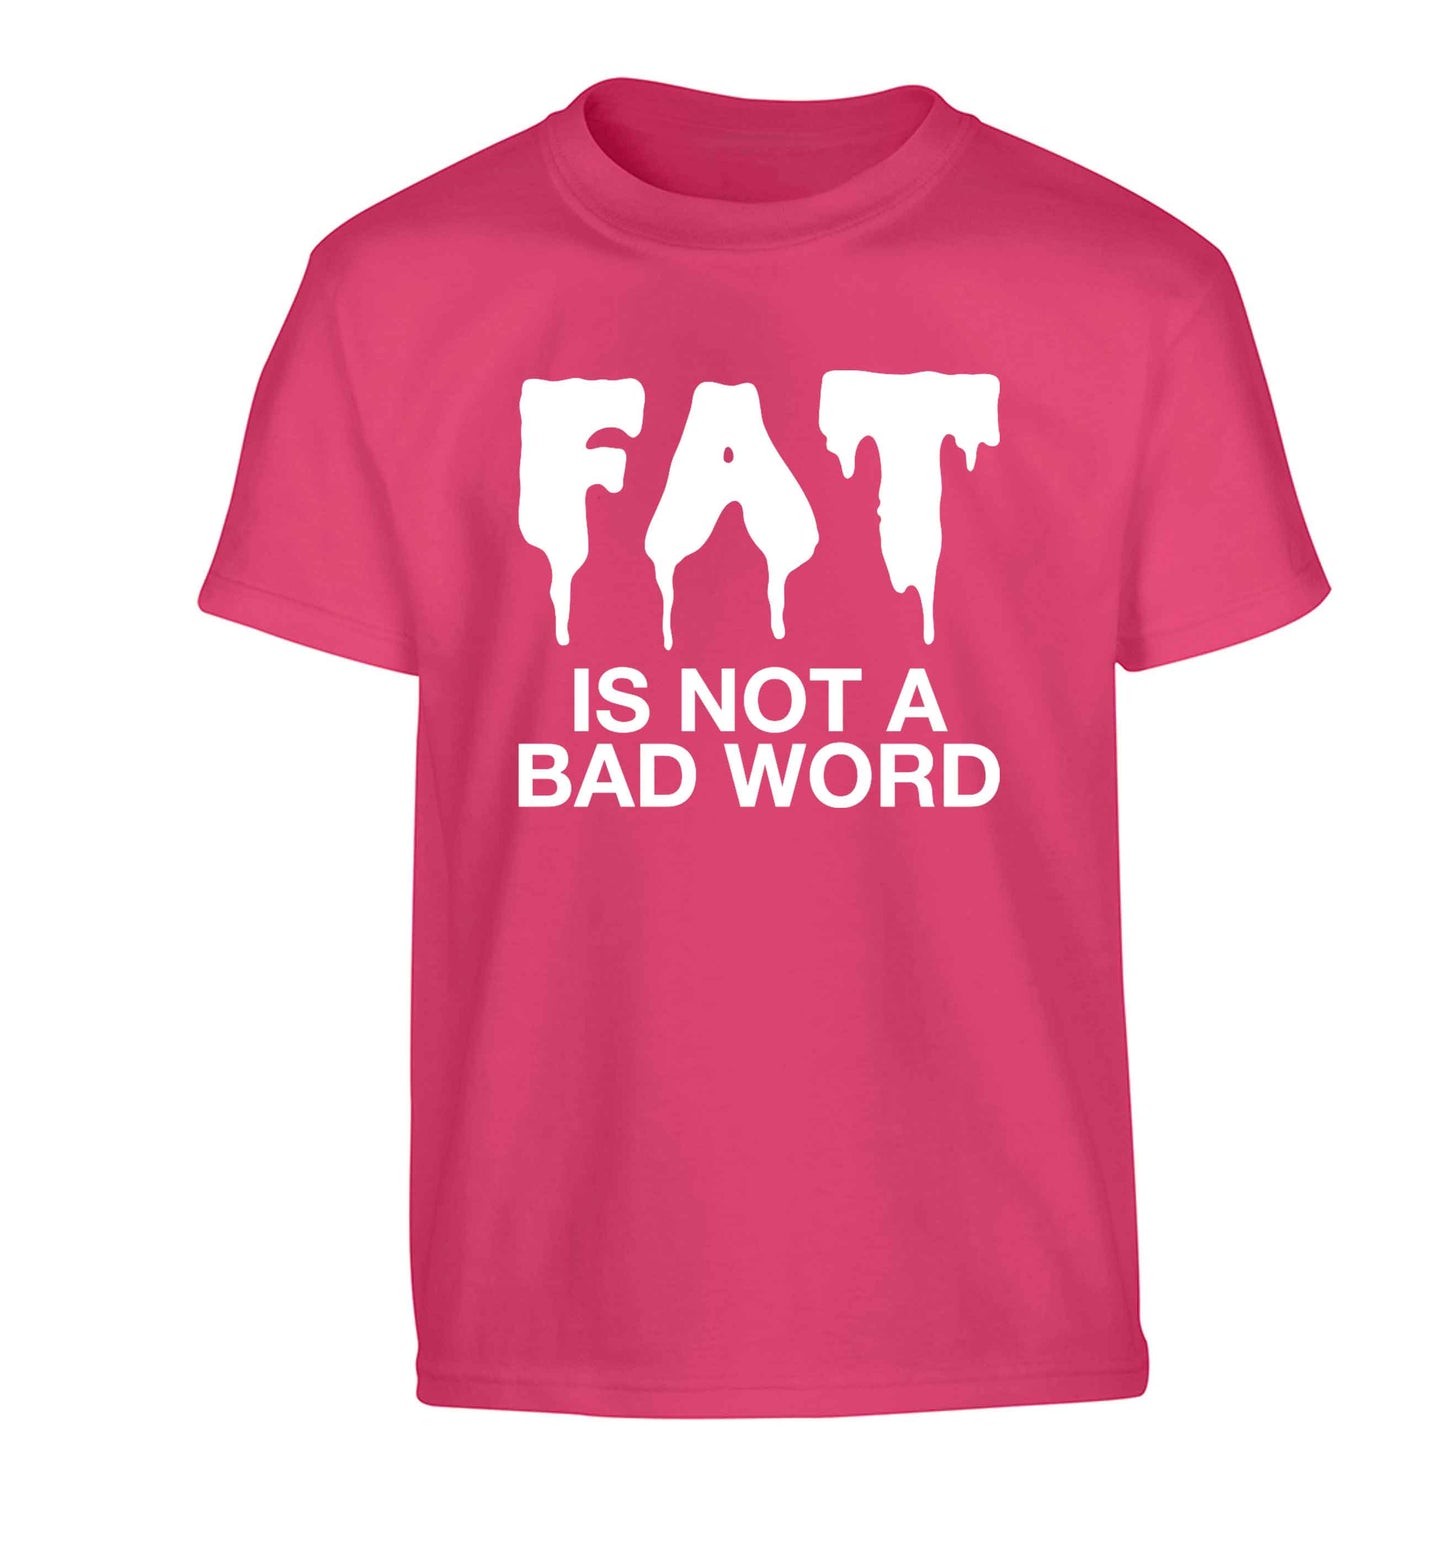 Fat is not a bad word Children's pink Tshirt 12-13 Years